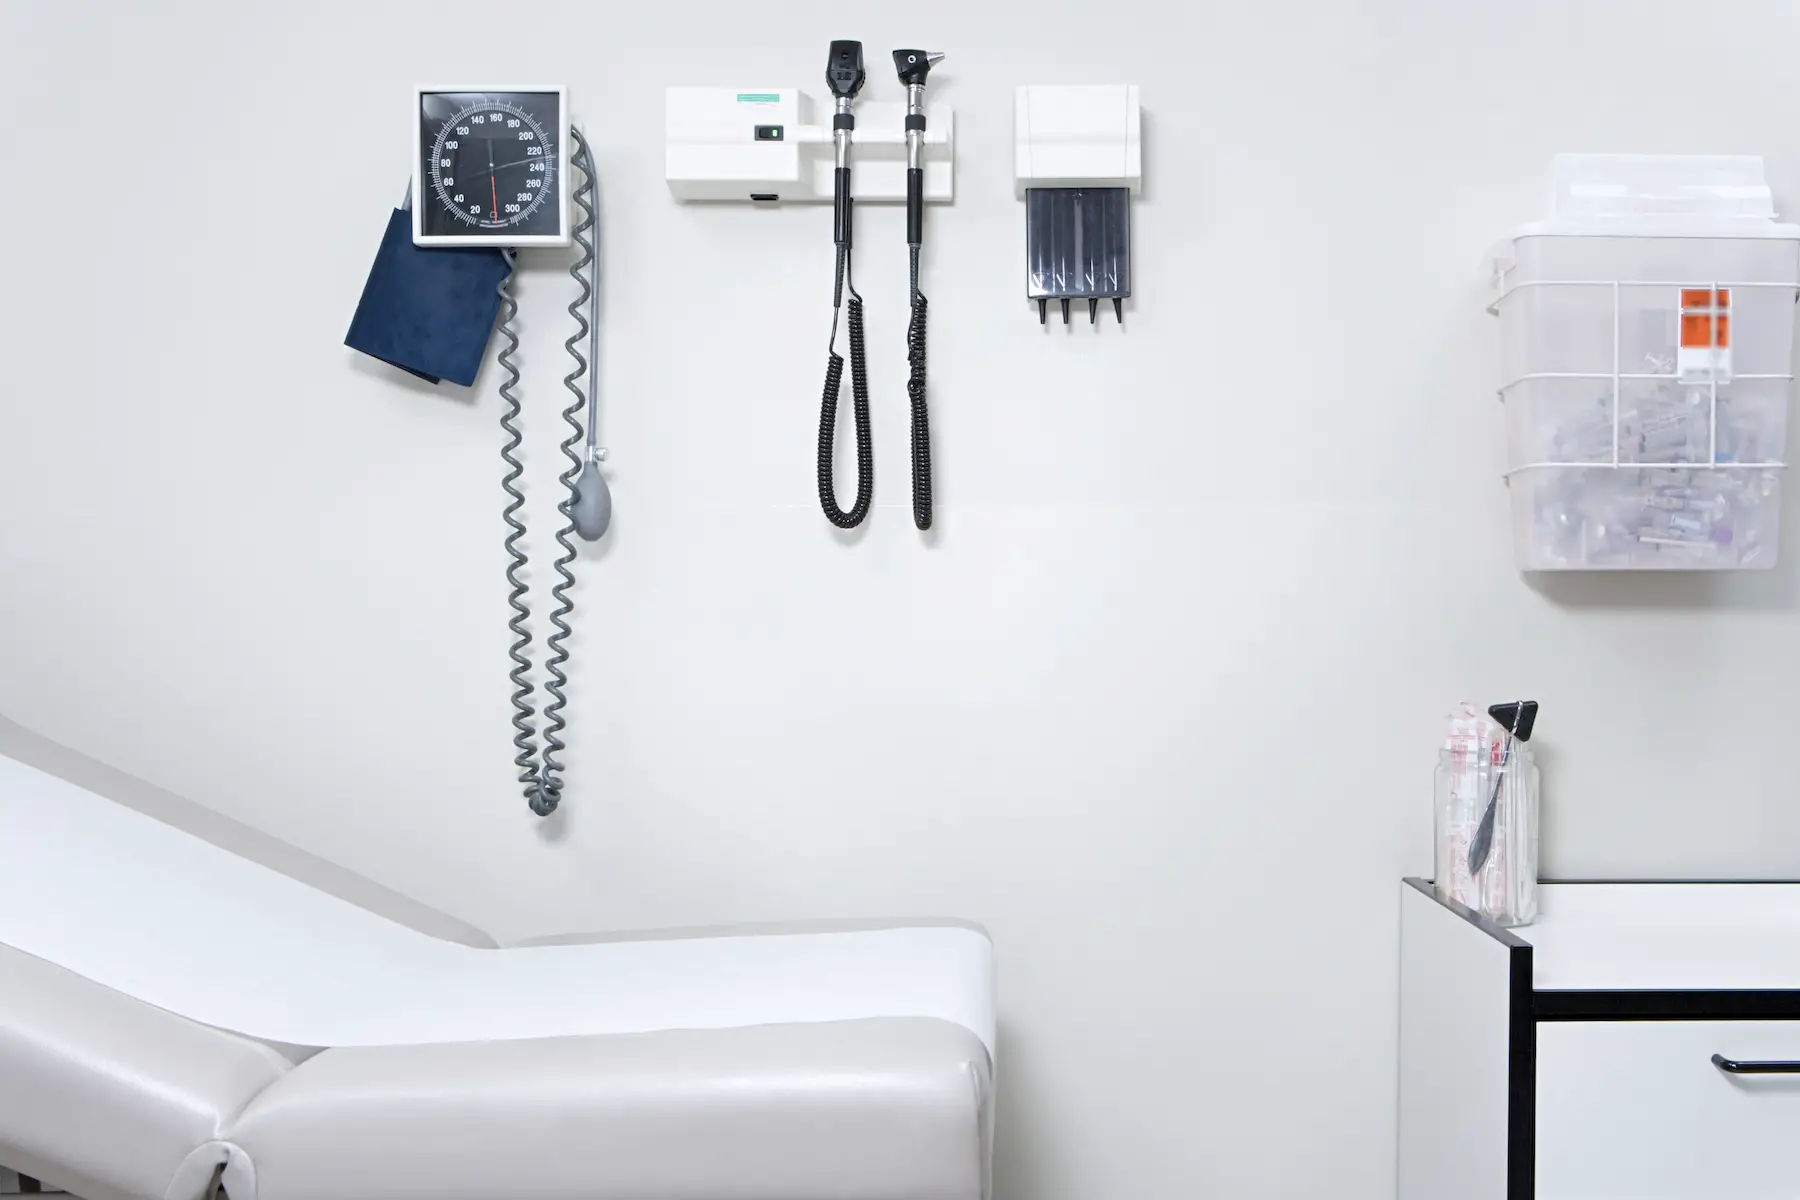 The wall of an empty doctor's office exam room is shown, with a blood pressure monitor and various other equipment on display